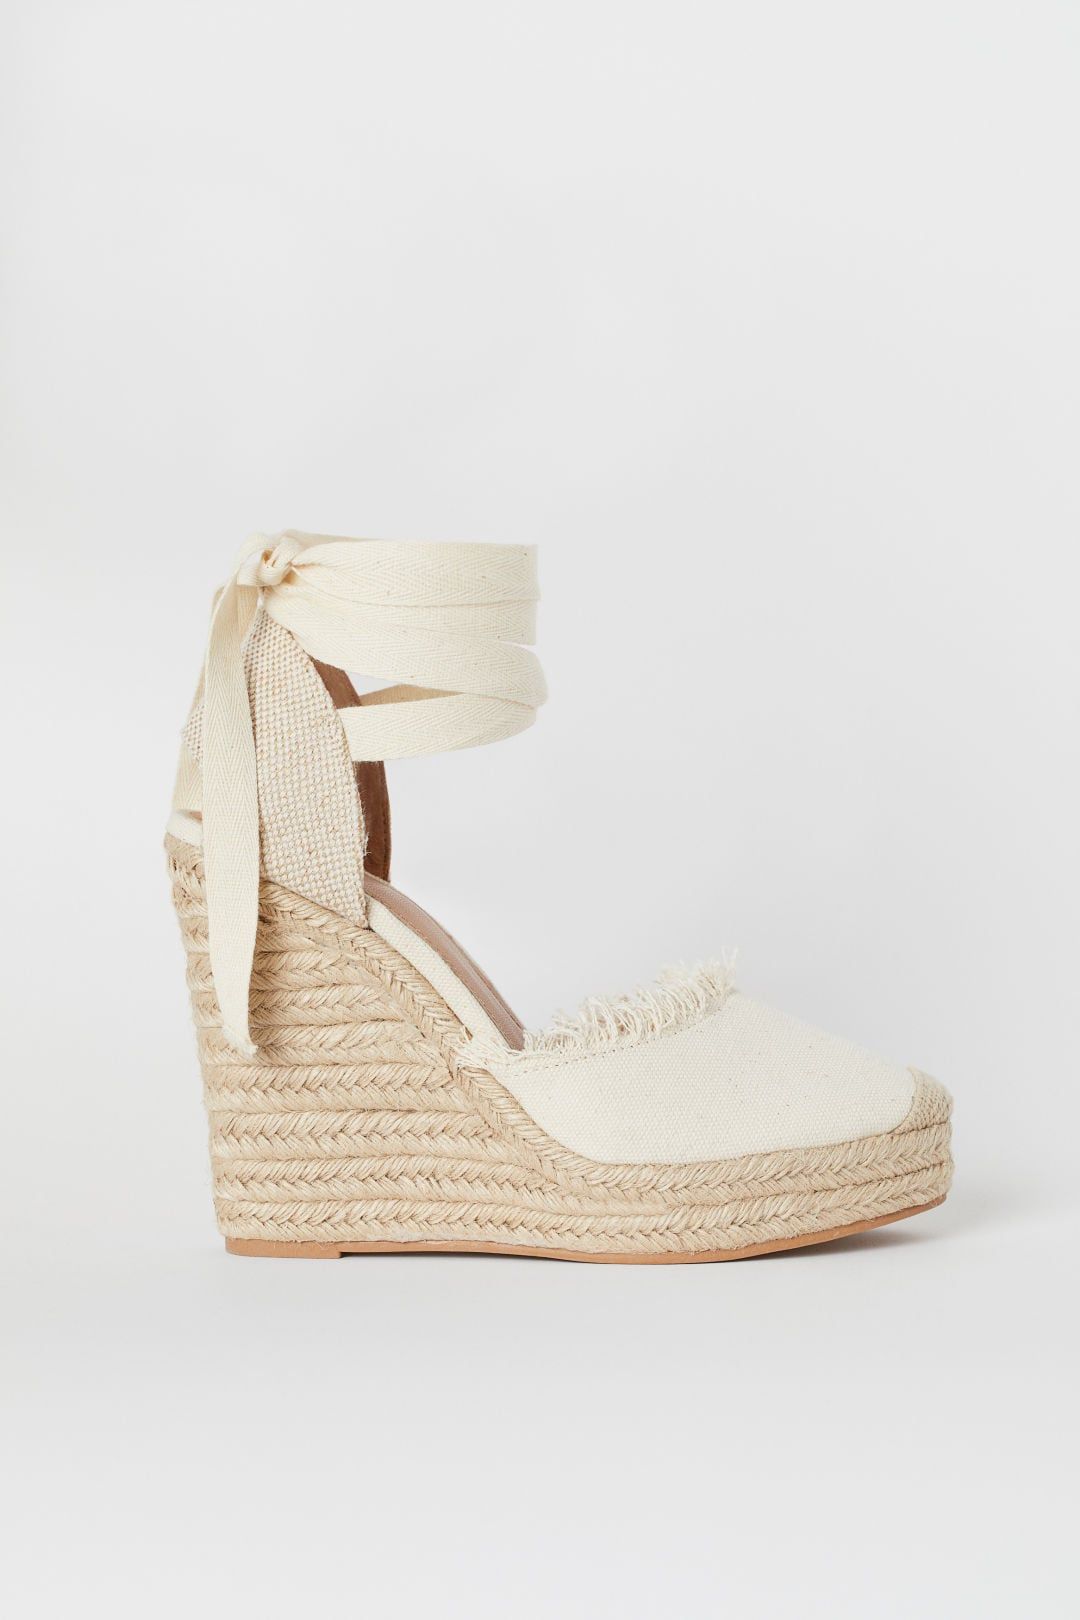 Add stylish wedges heels to your footwear collection